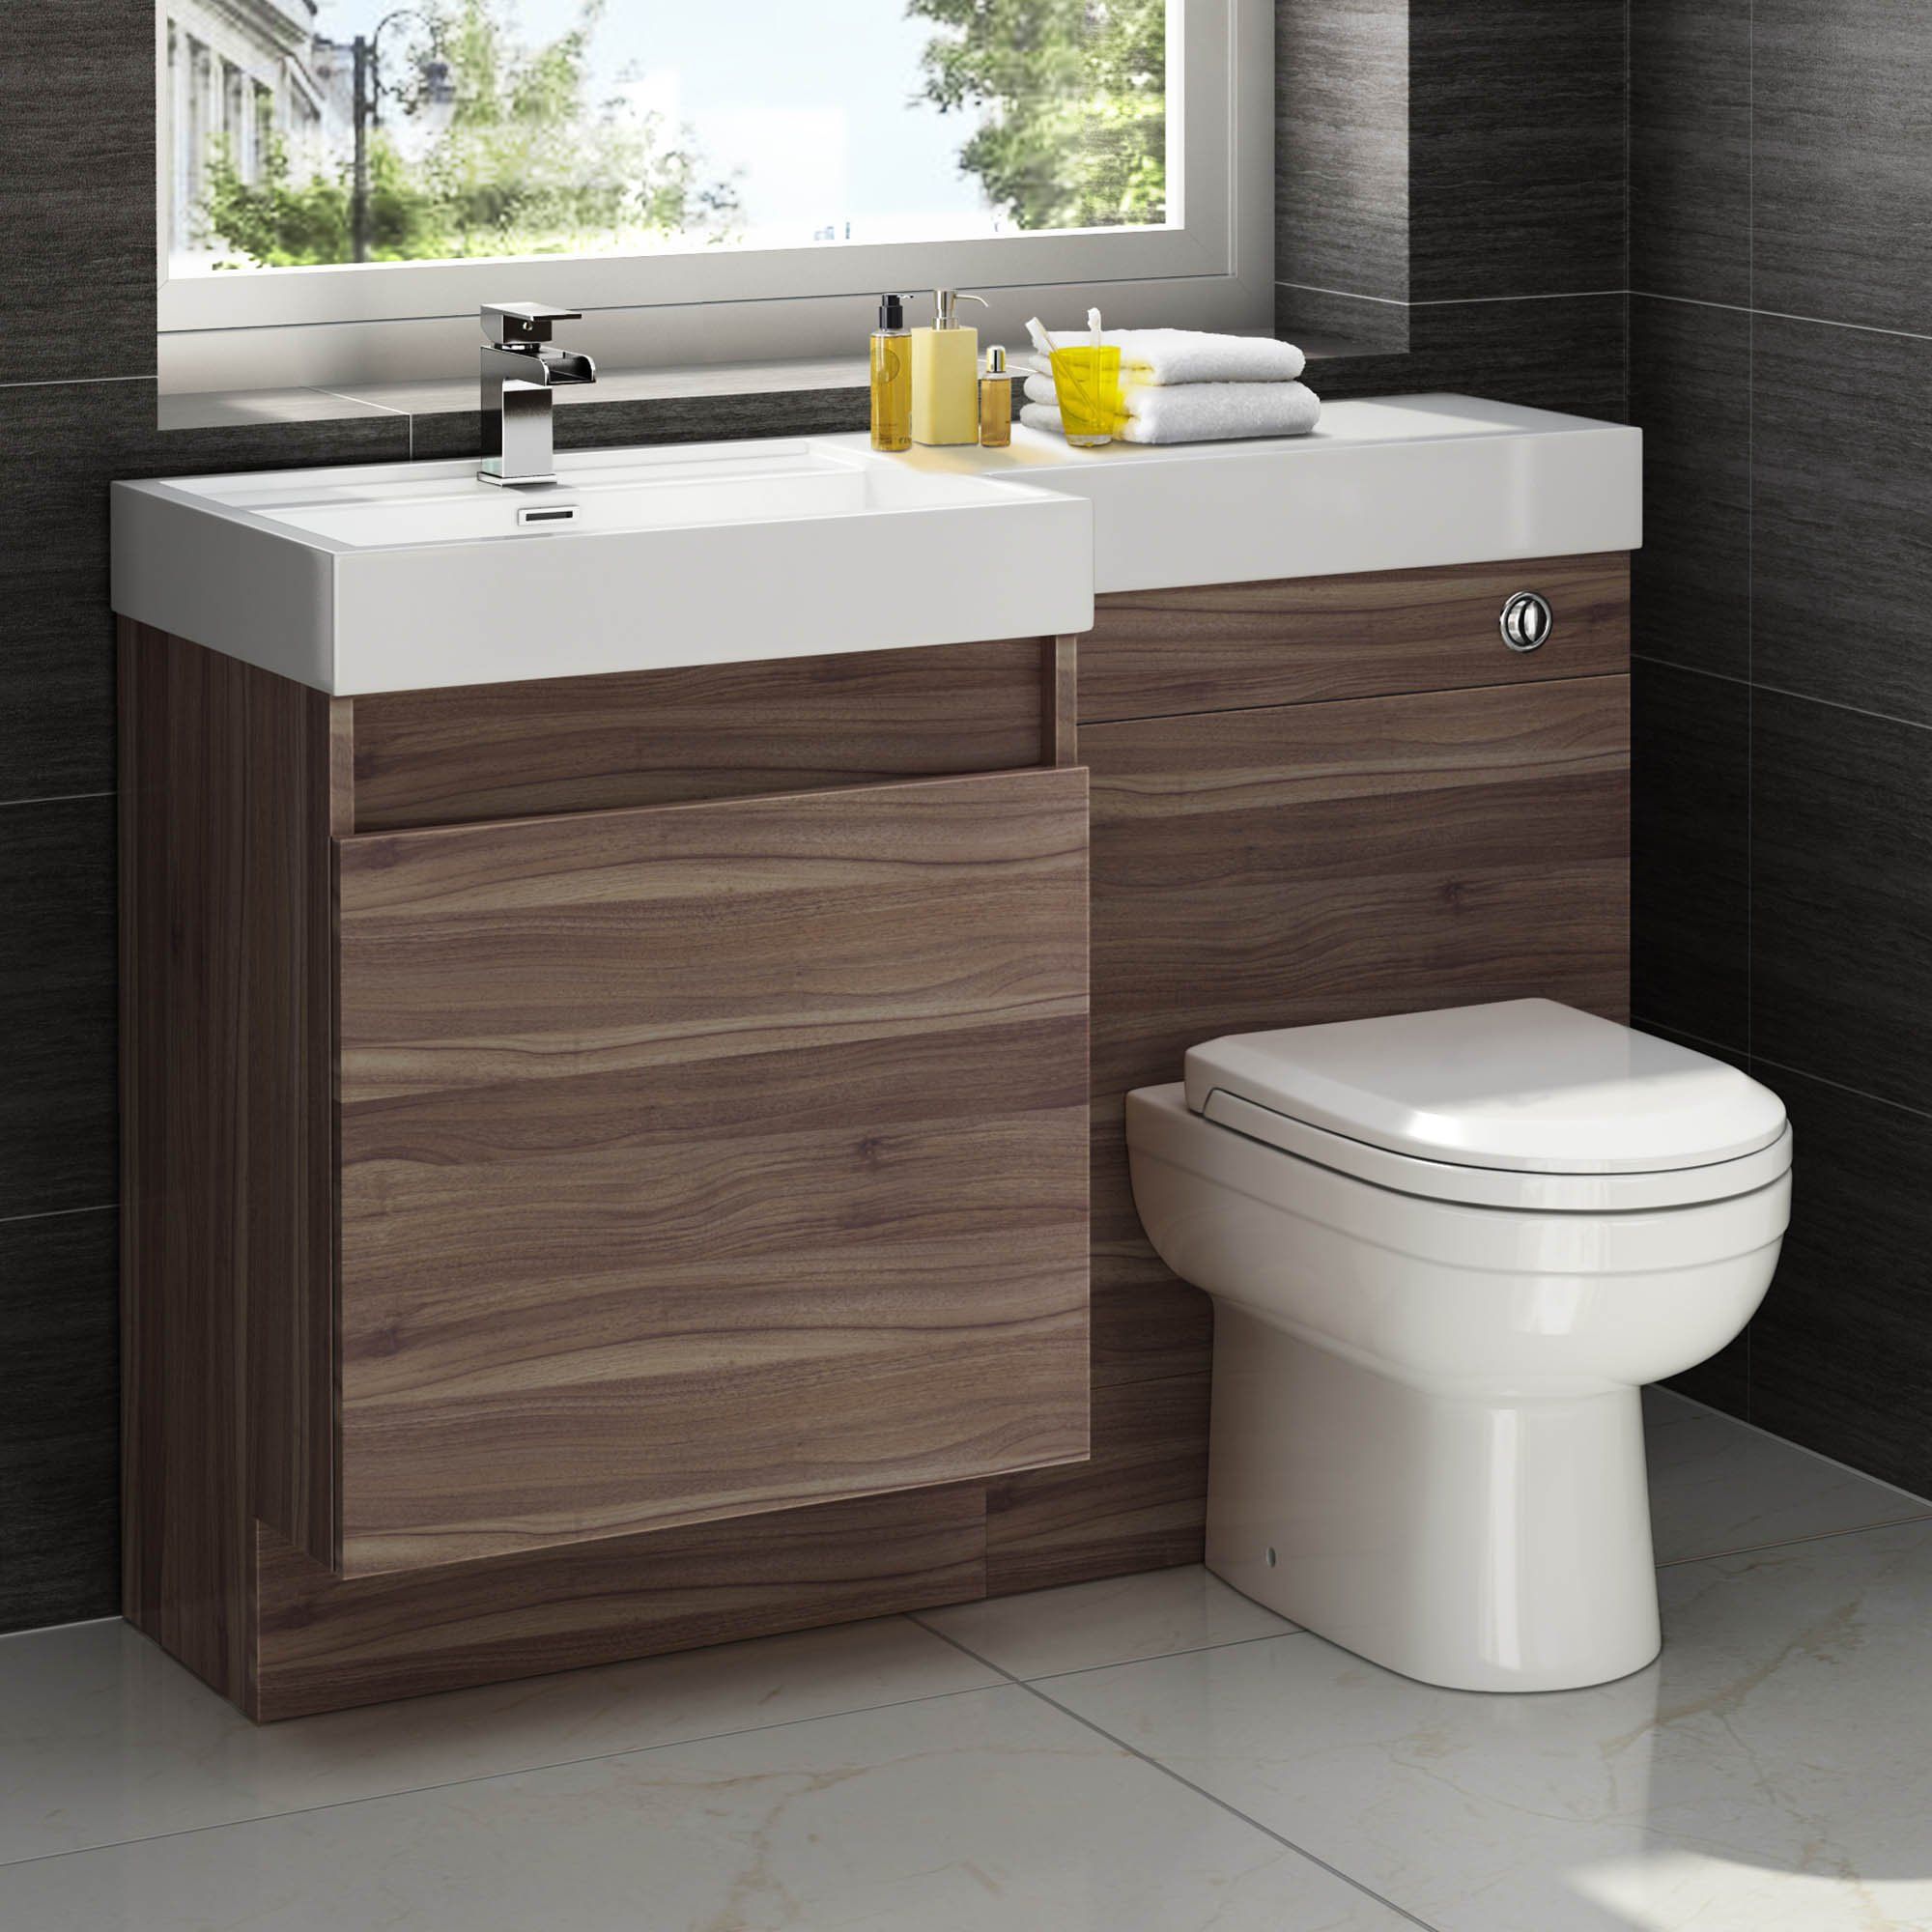 toilet and double sink vanity unit Vanity bathroom toilet units unit walnut sink sinks storage modern left square basin furniture countertop bathrooms 1200mm wall hand contemporary